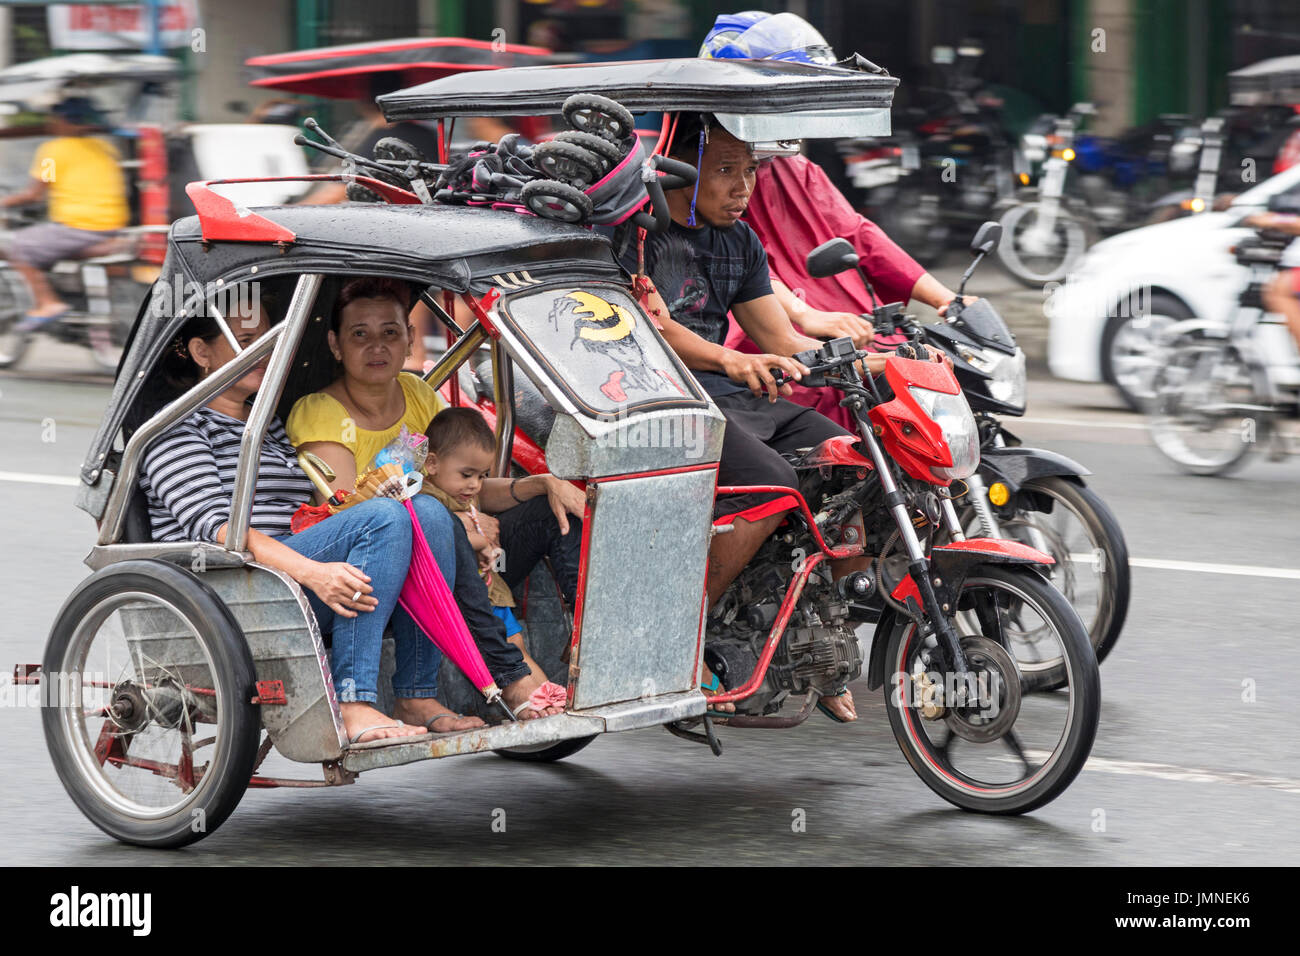 Tricycle taxi in traffic, Angeles City, Pampanga, Philippines Stock Photo